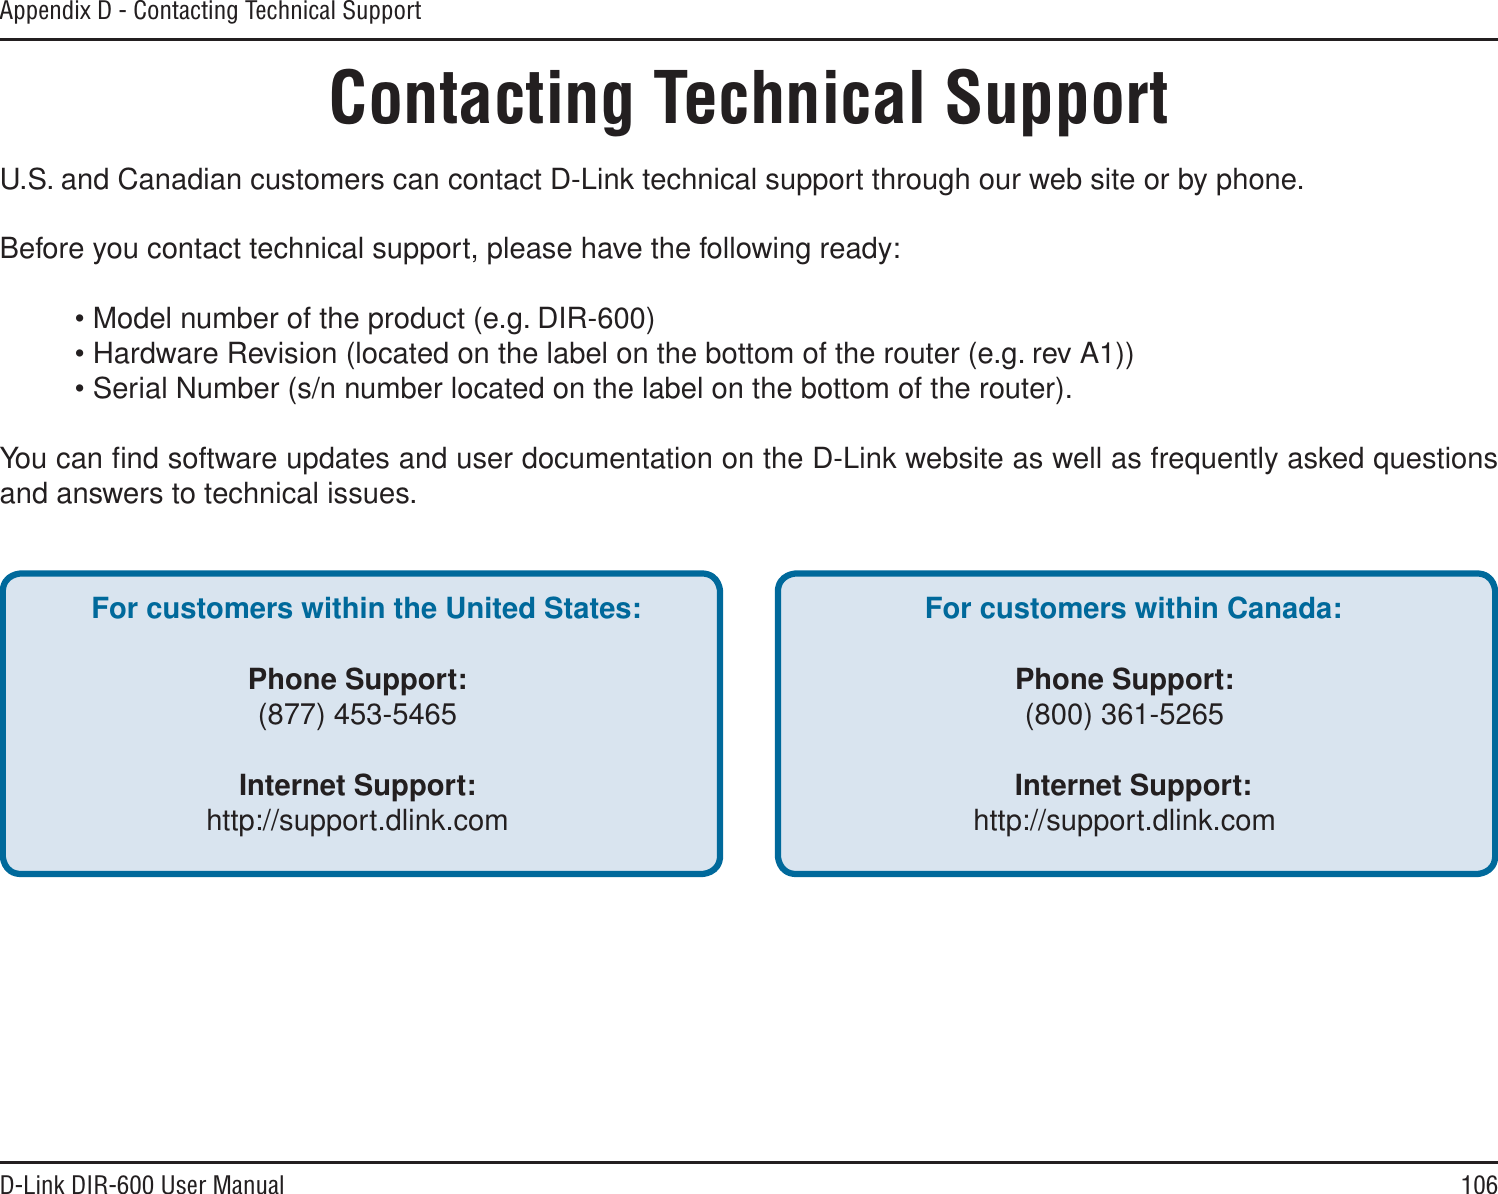 106D-Link DIR-600 User ManualAppendix D - Contacting Technical SupportContacting Technical SupportU.S. and Canadian customers can contact D-Link technical support through our web site or by phone.Before you contact technical support, please have the following ready:• Model number of the product (e.g. DIR-600)• Hardware Revision (located on the label on the bottom of the router (e.g. rev A1))• Serial Number (s/n number located on the label on the bottom of the router). You can ﬁnd software updates and user documentation on the D-Link website as well as frequently asked questions and answers to technical issues.For customers within the United States:Phone Support:(877) 453-5465Internet Support:http://support.dlink.comFor customers within Canada:Phone Support:(800) 361-5265Internet Support:http://support.dlink.com